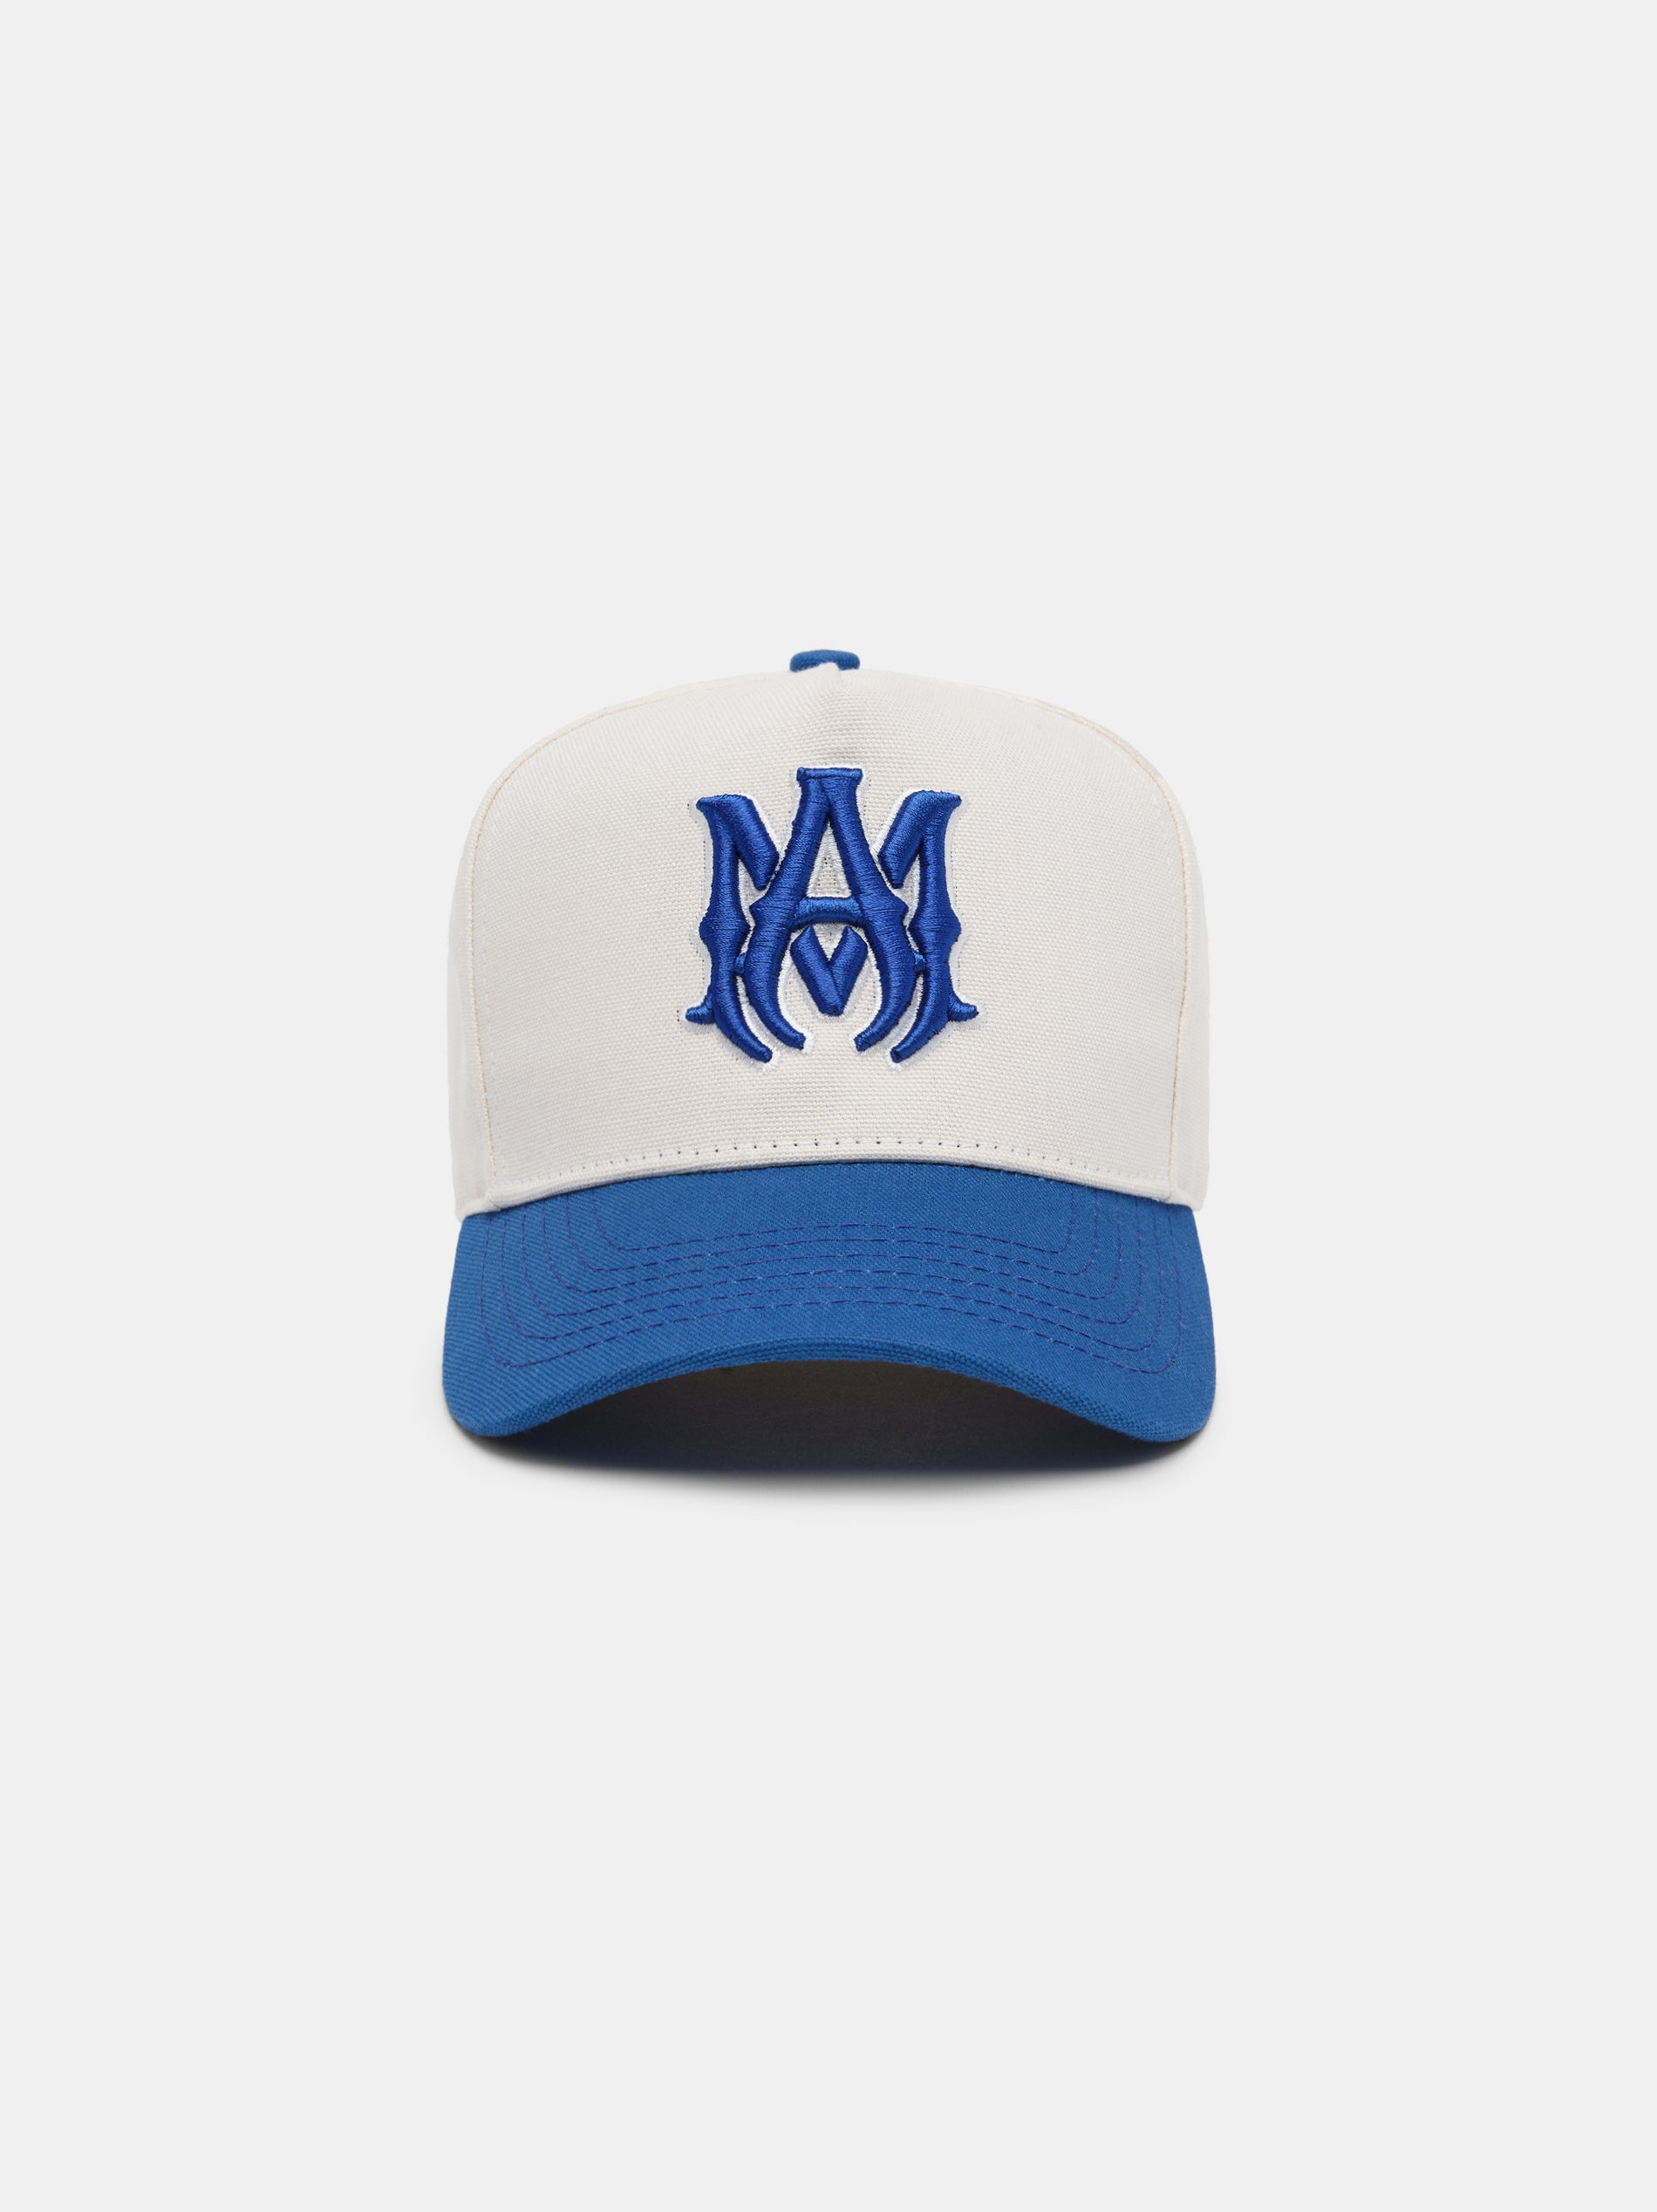 Product MA CANVAS HAT - Alabaster Blue featured image